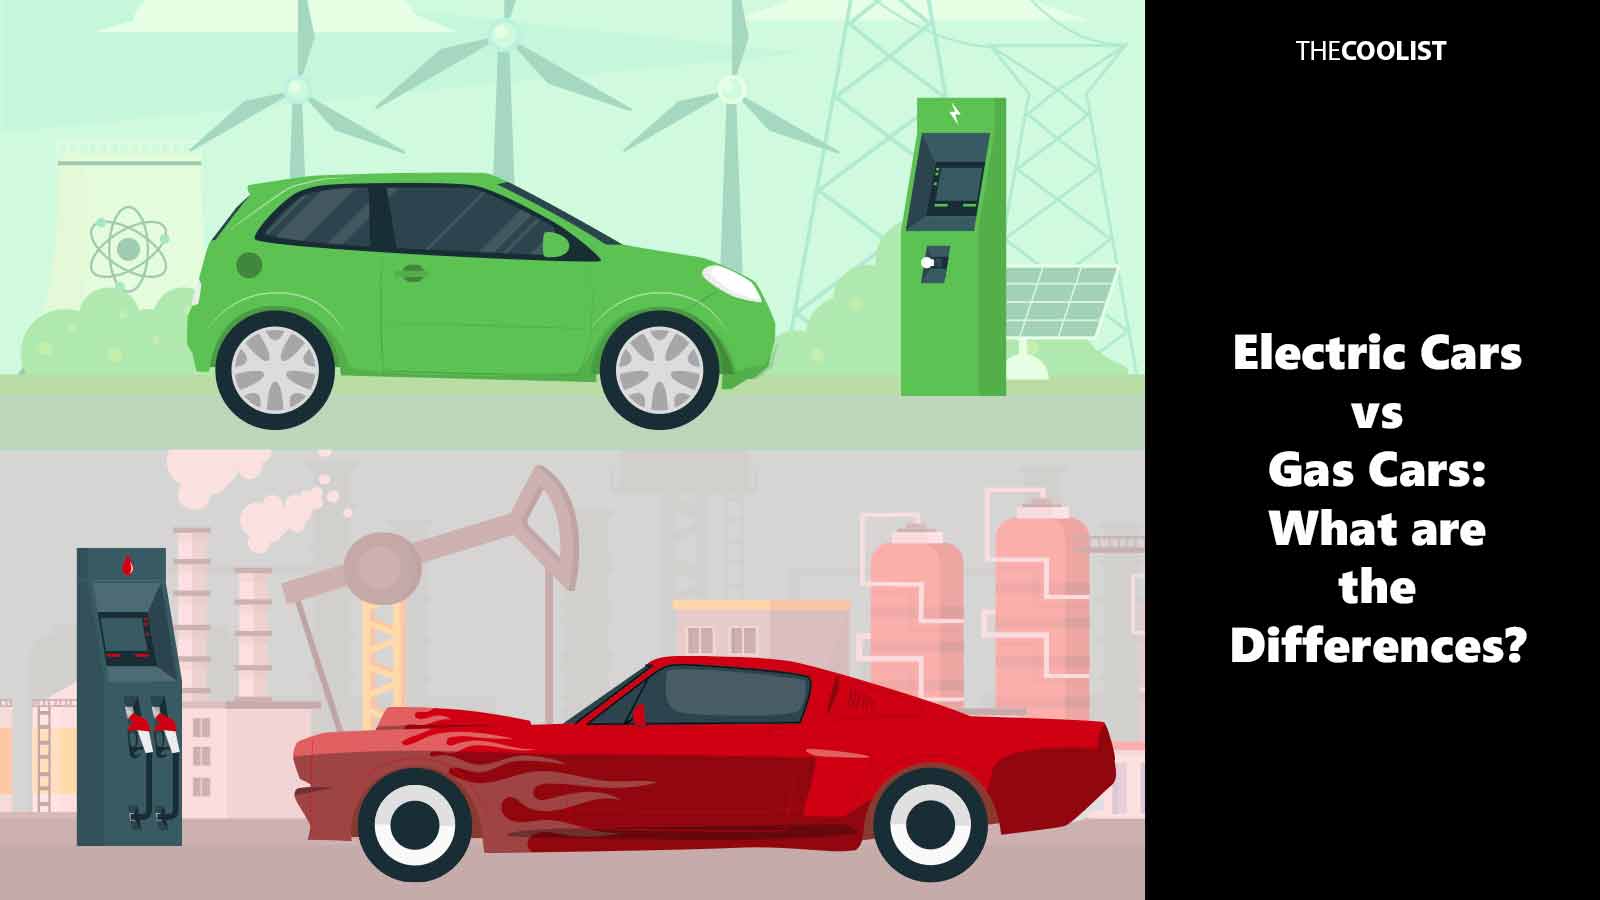 Electric Cars vs Gas Cars: What are the differences?